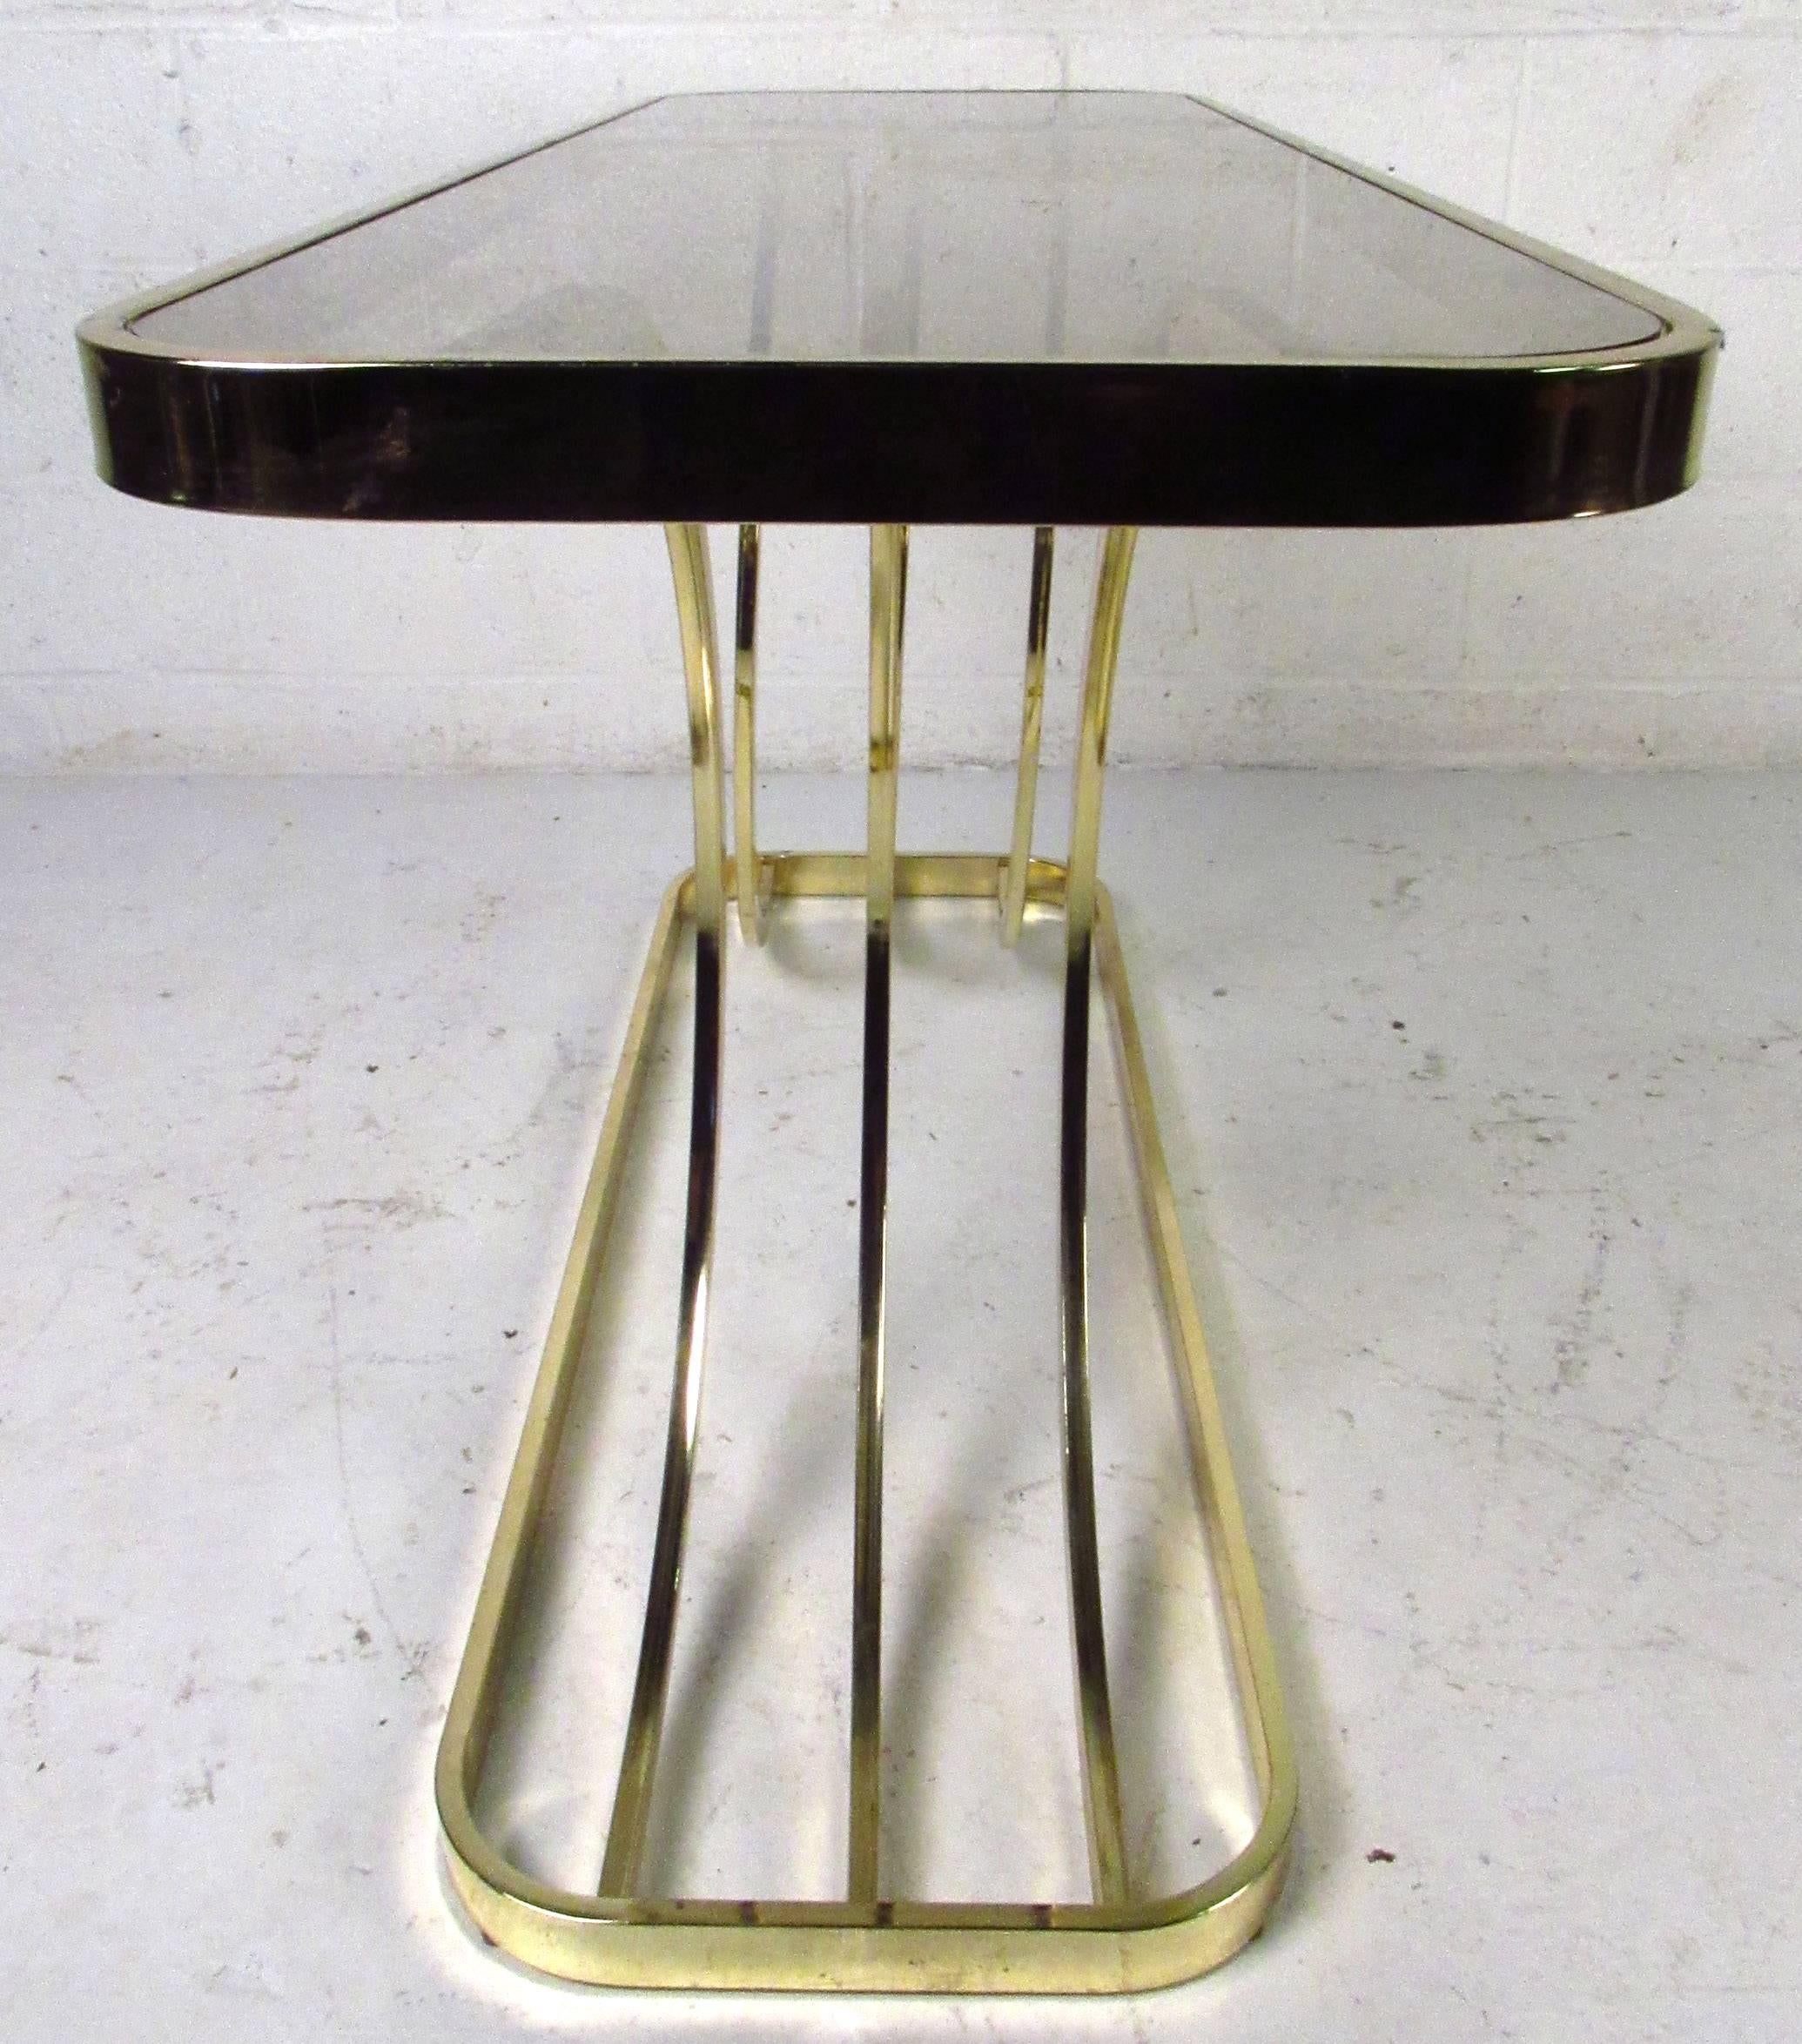 vintage brass console table